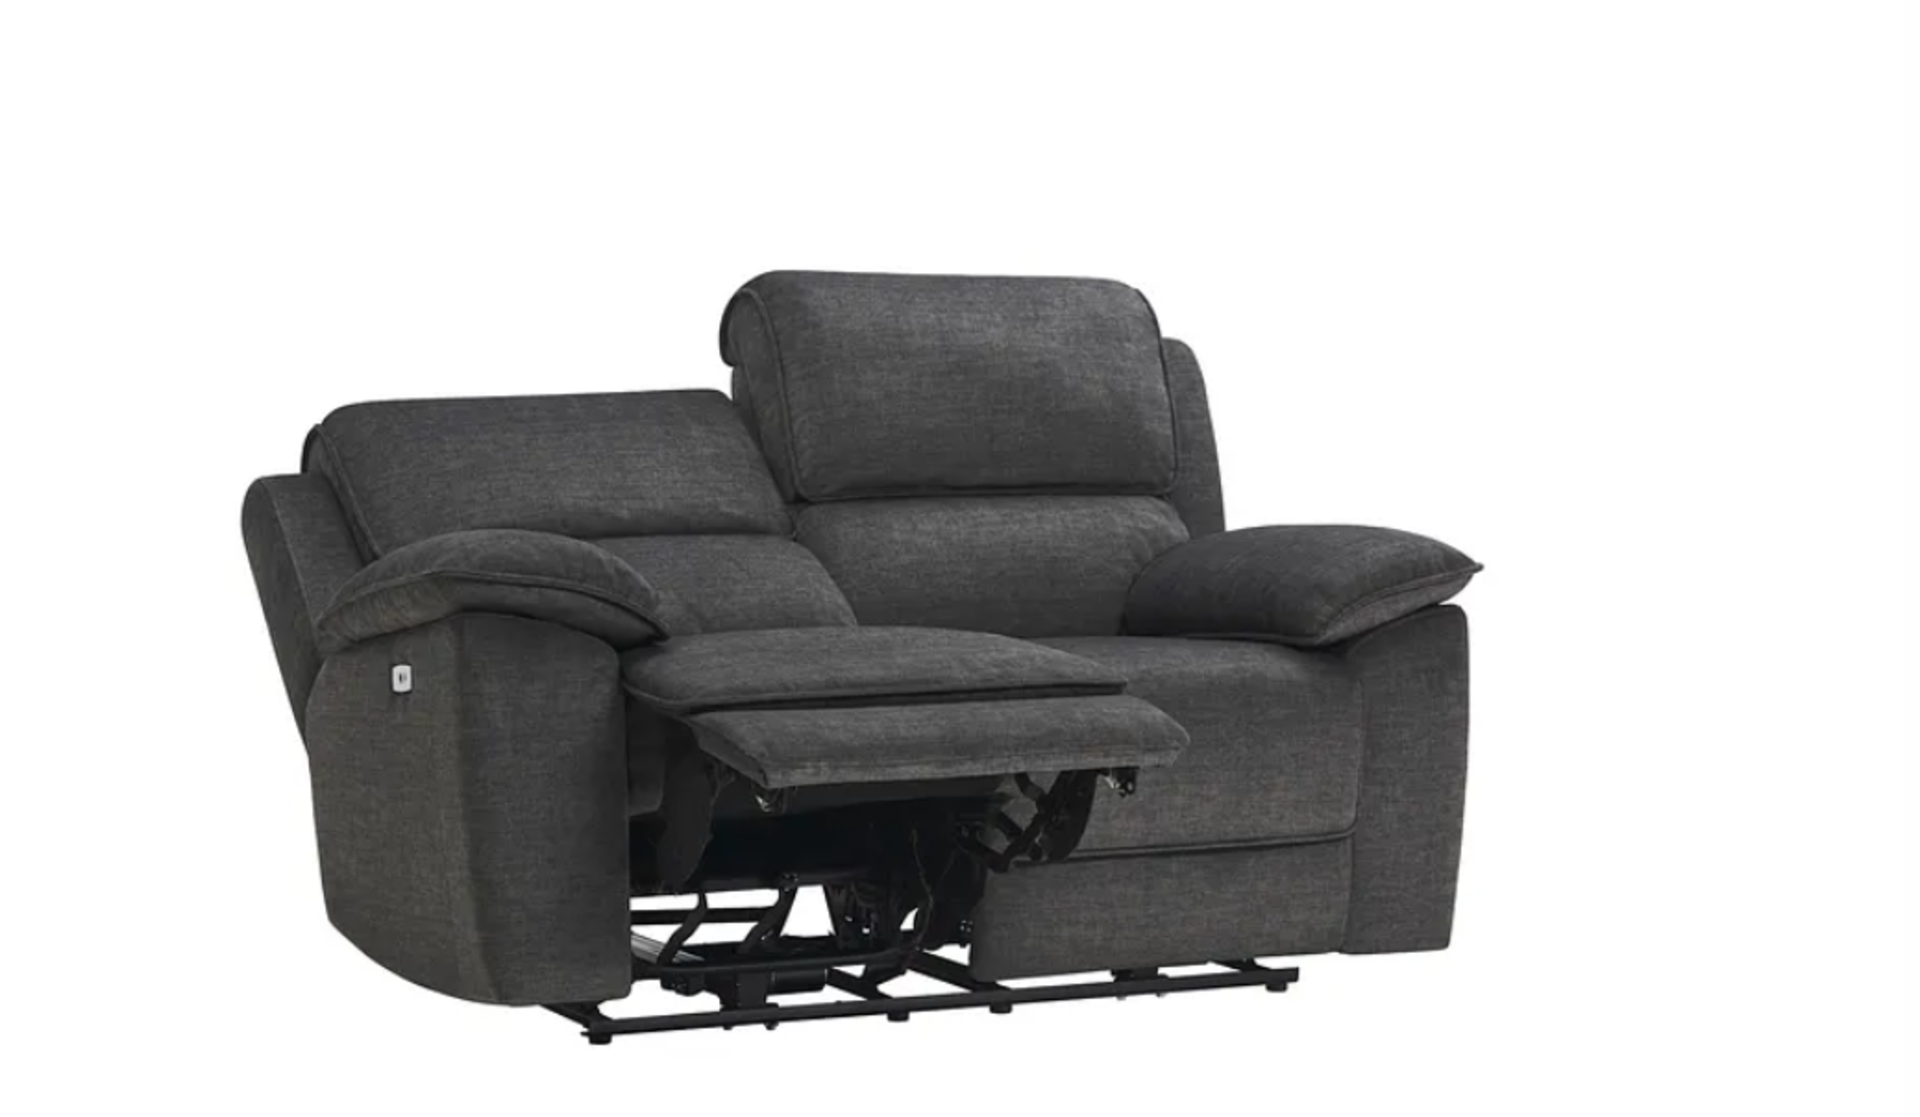 GOODWOOD 2 Seater Electric Recliner Sofa | Plush Charcoal Fabric. RRP £1,299.00. Sink into the - Image 2 of 2